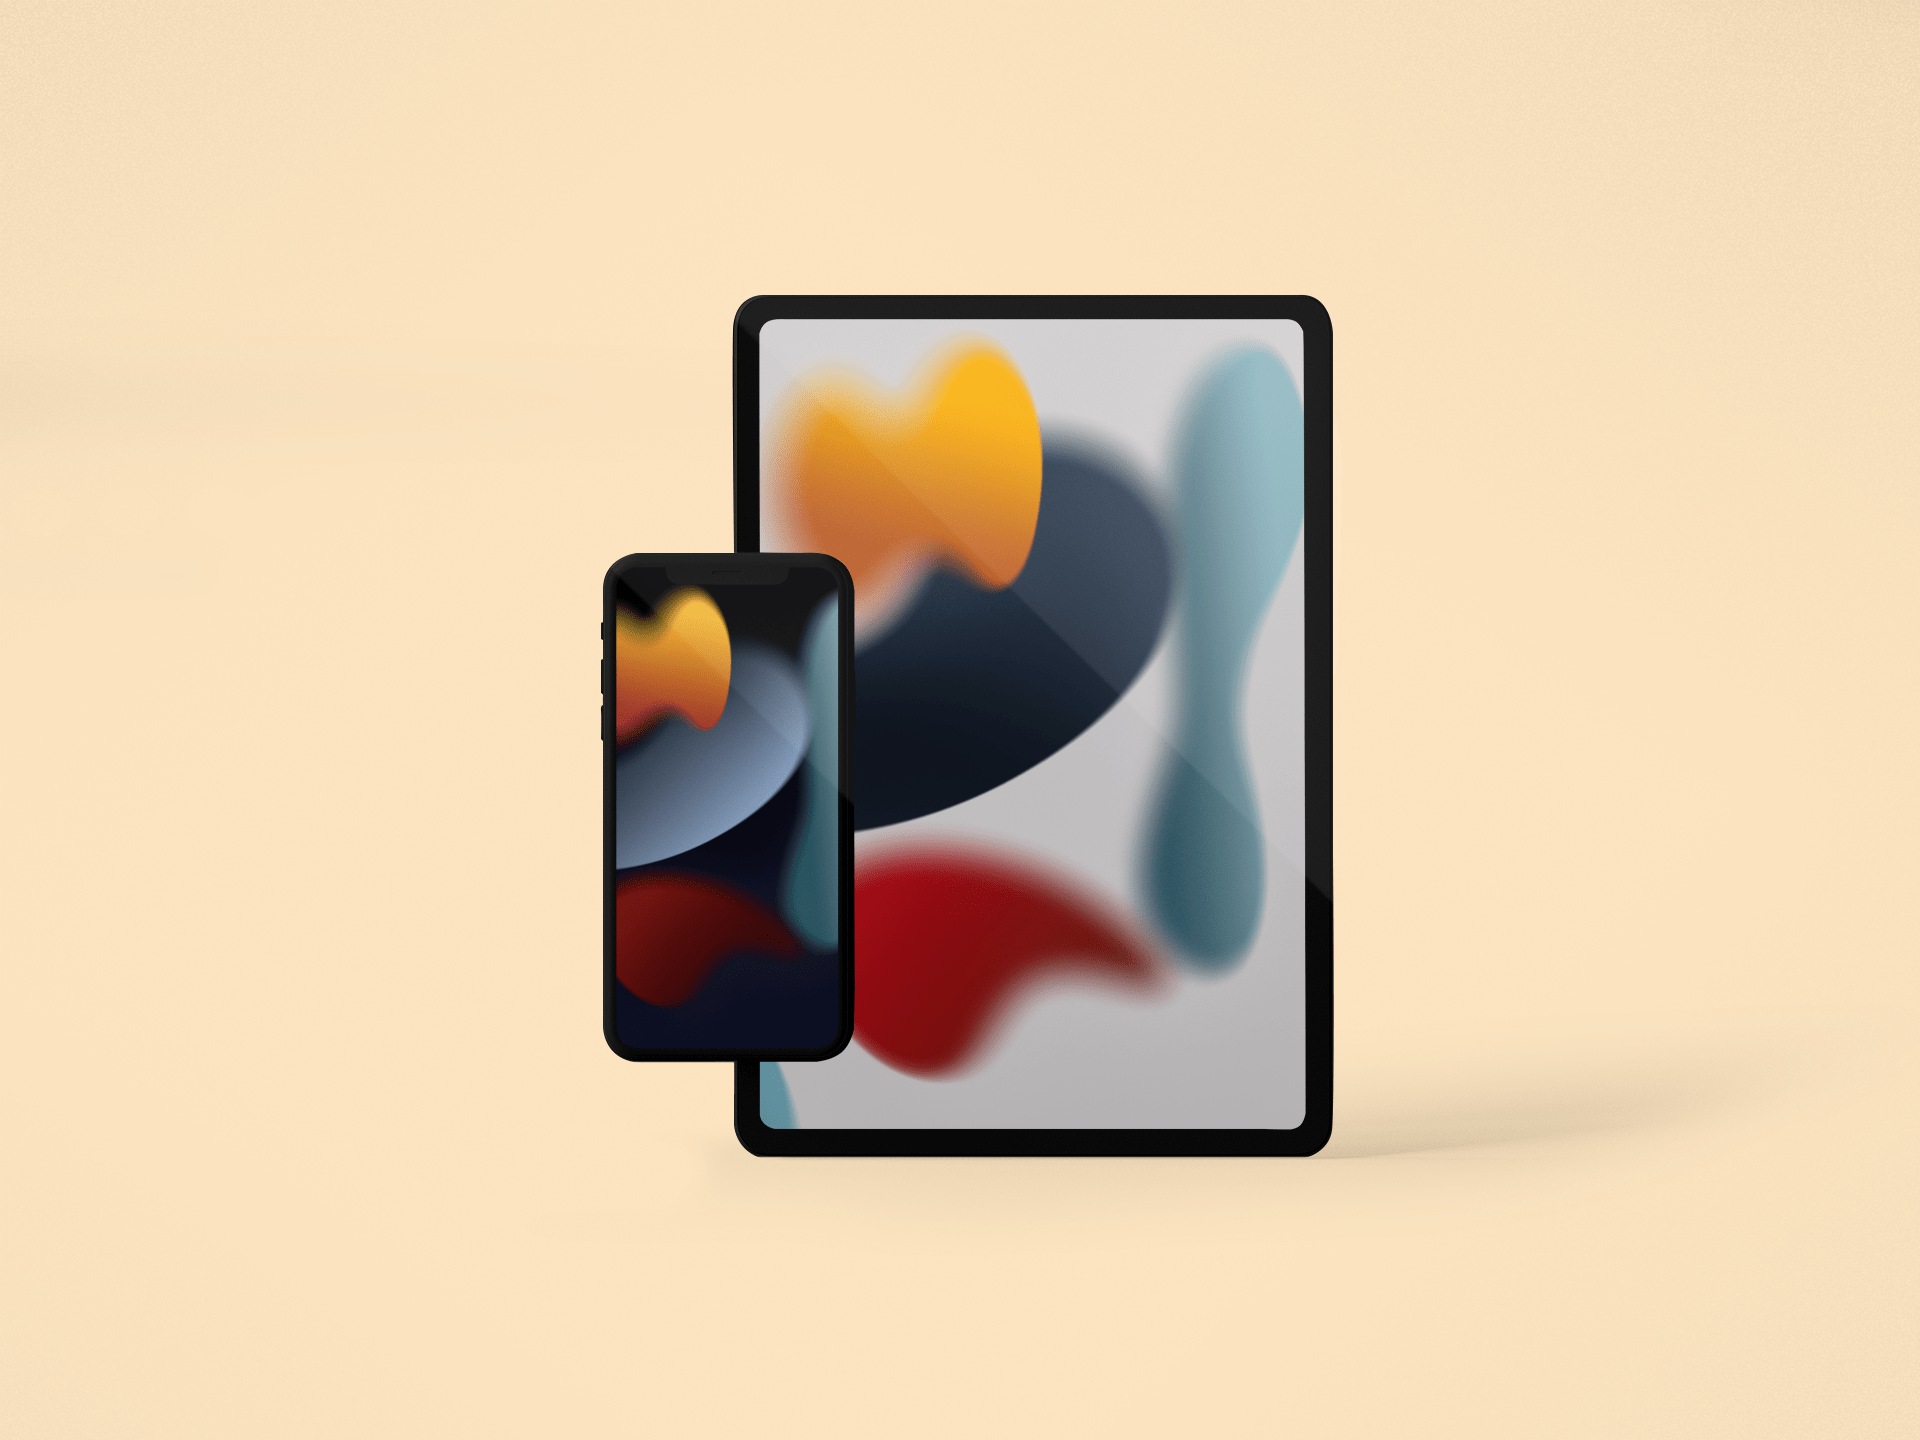 The 10 best iPhone wallpapers of 2021